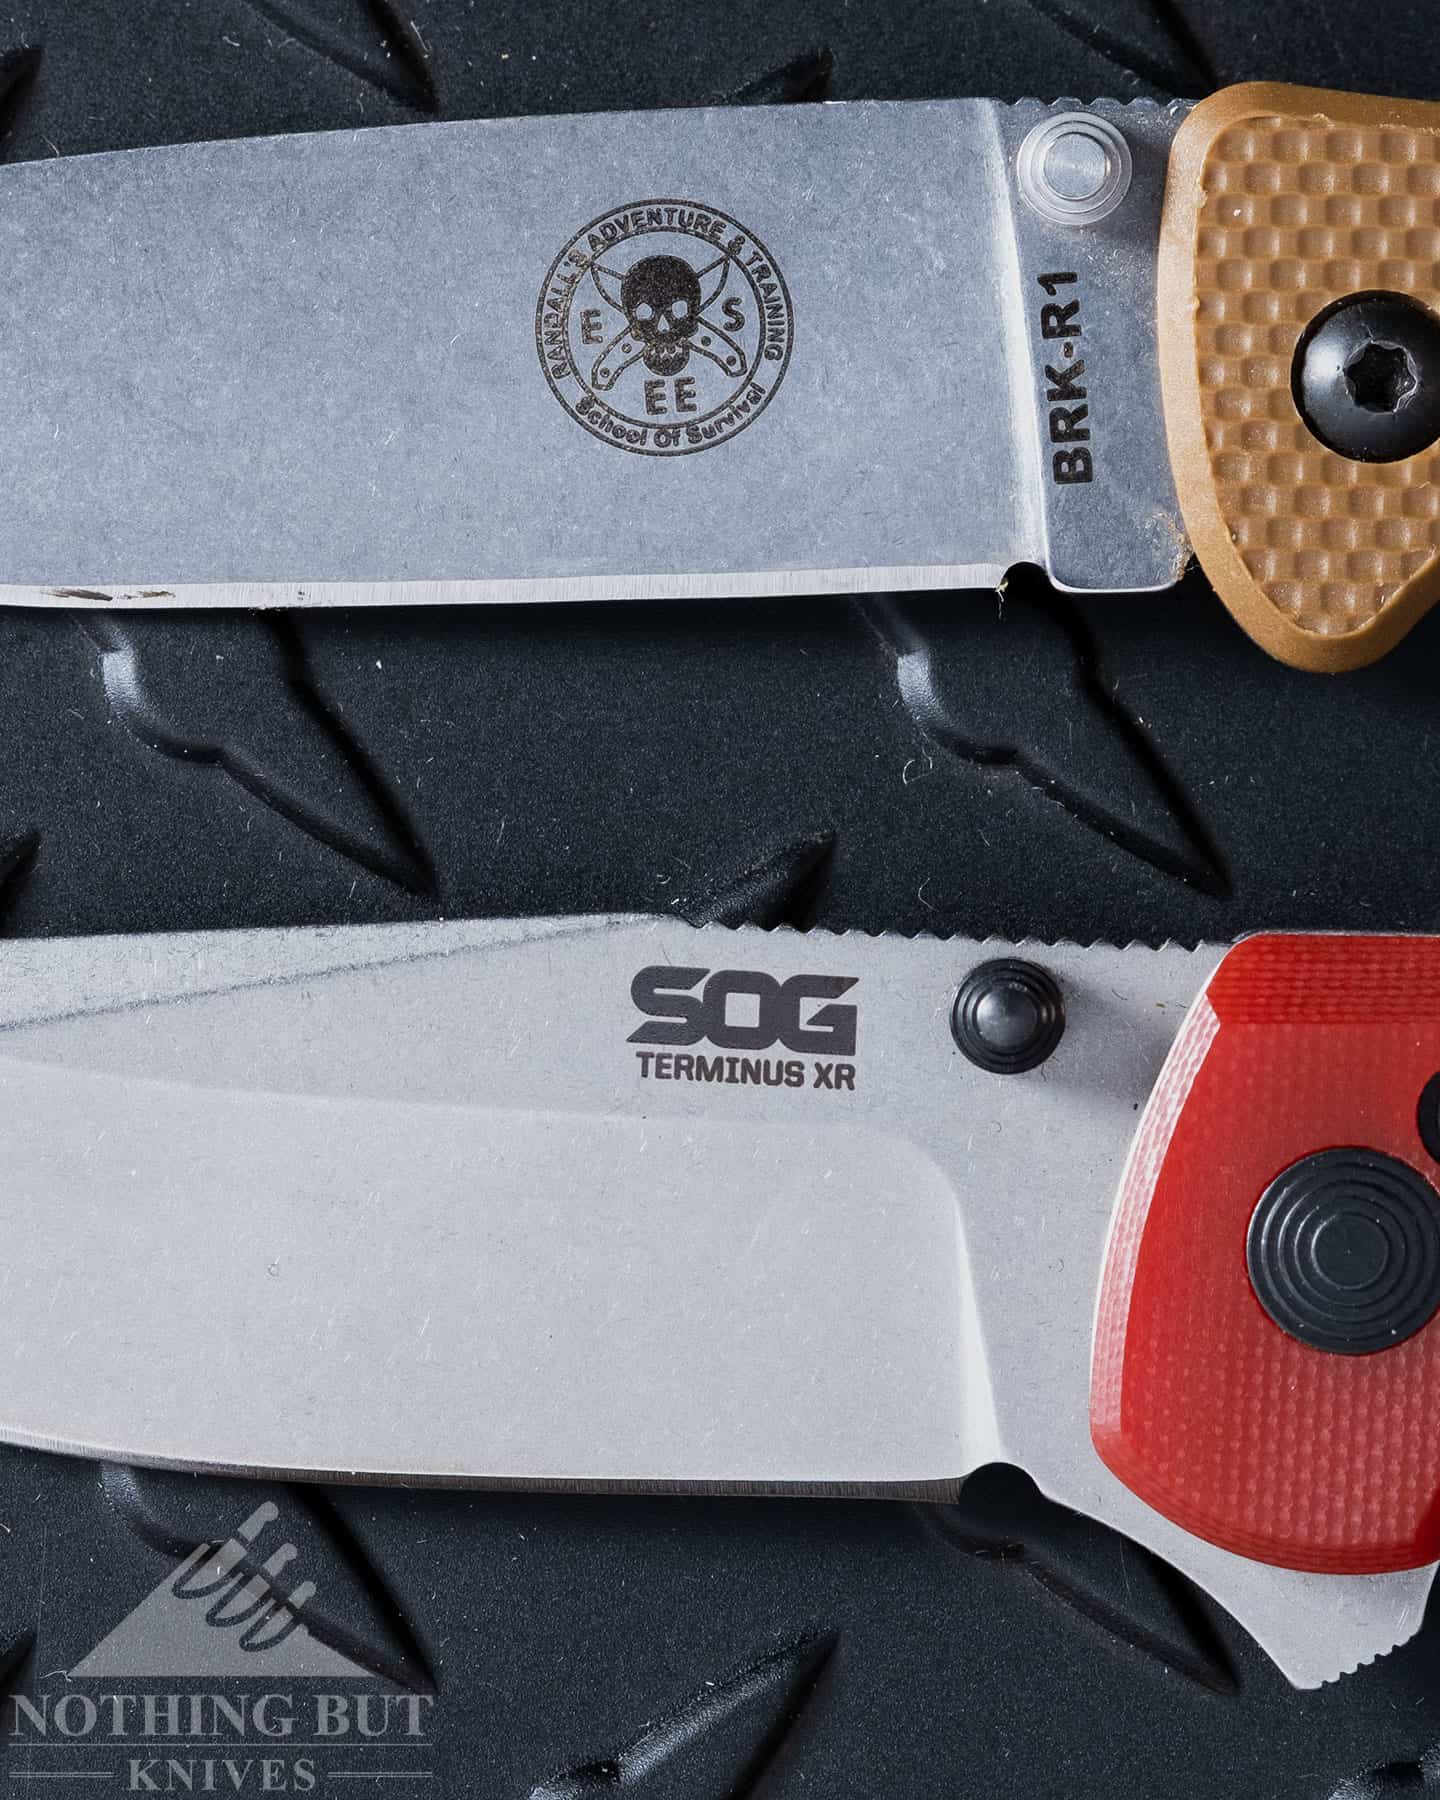 Close-up of the brand logos on two hard-use knives.